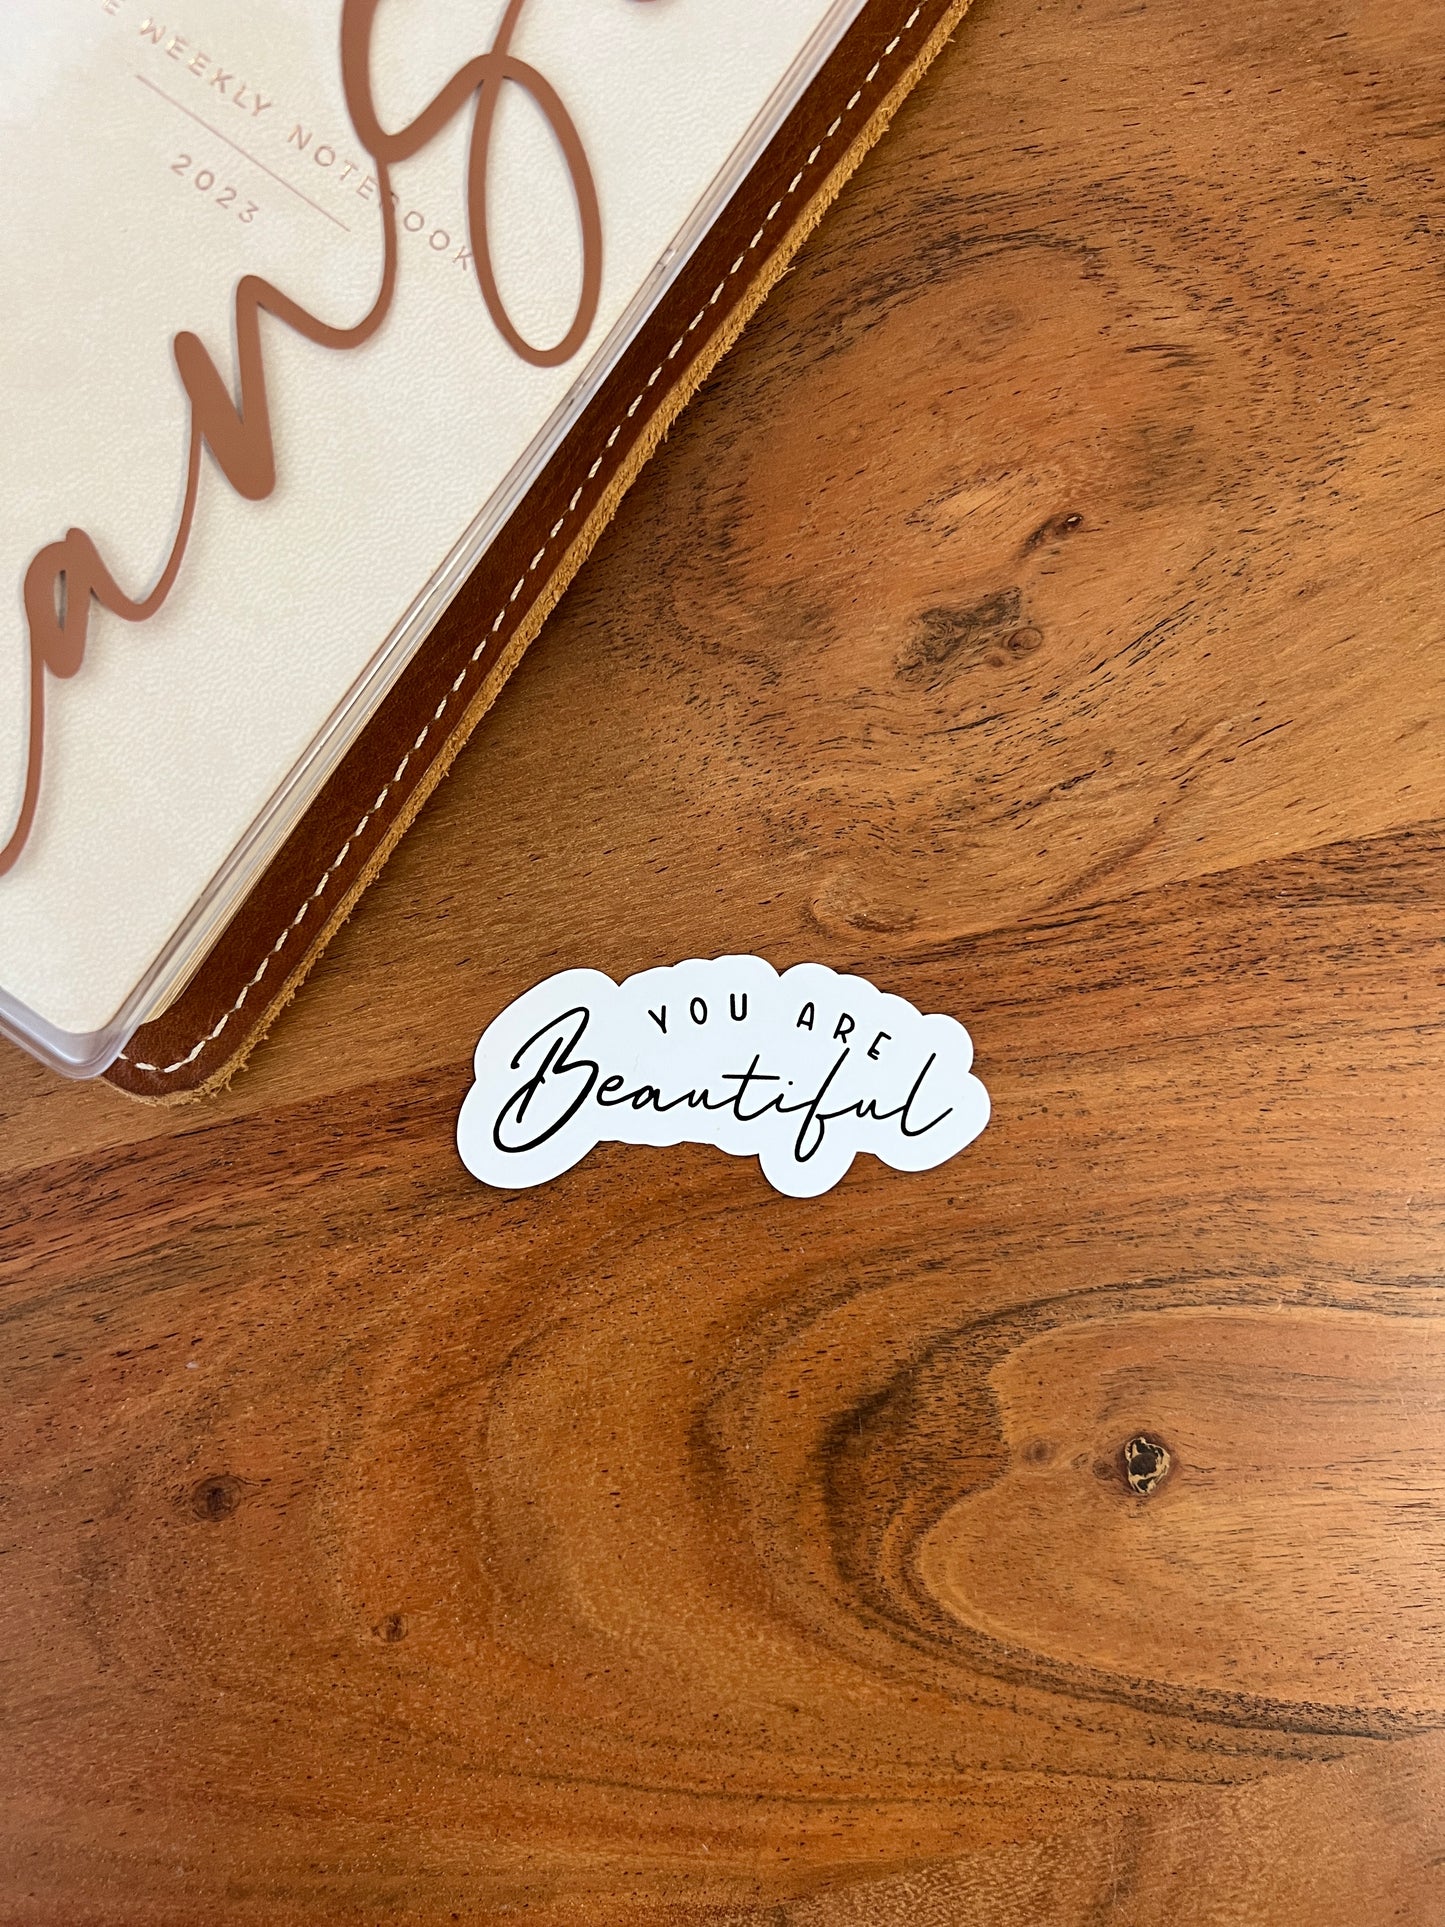 You are beautiful“ Die Cuts (Stickers) • White Vinyl Matte